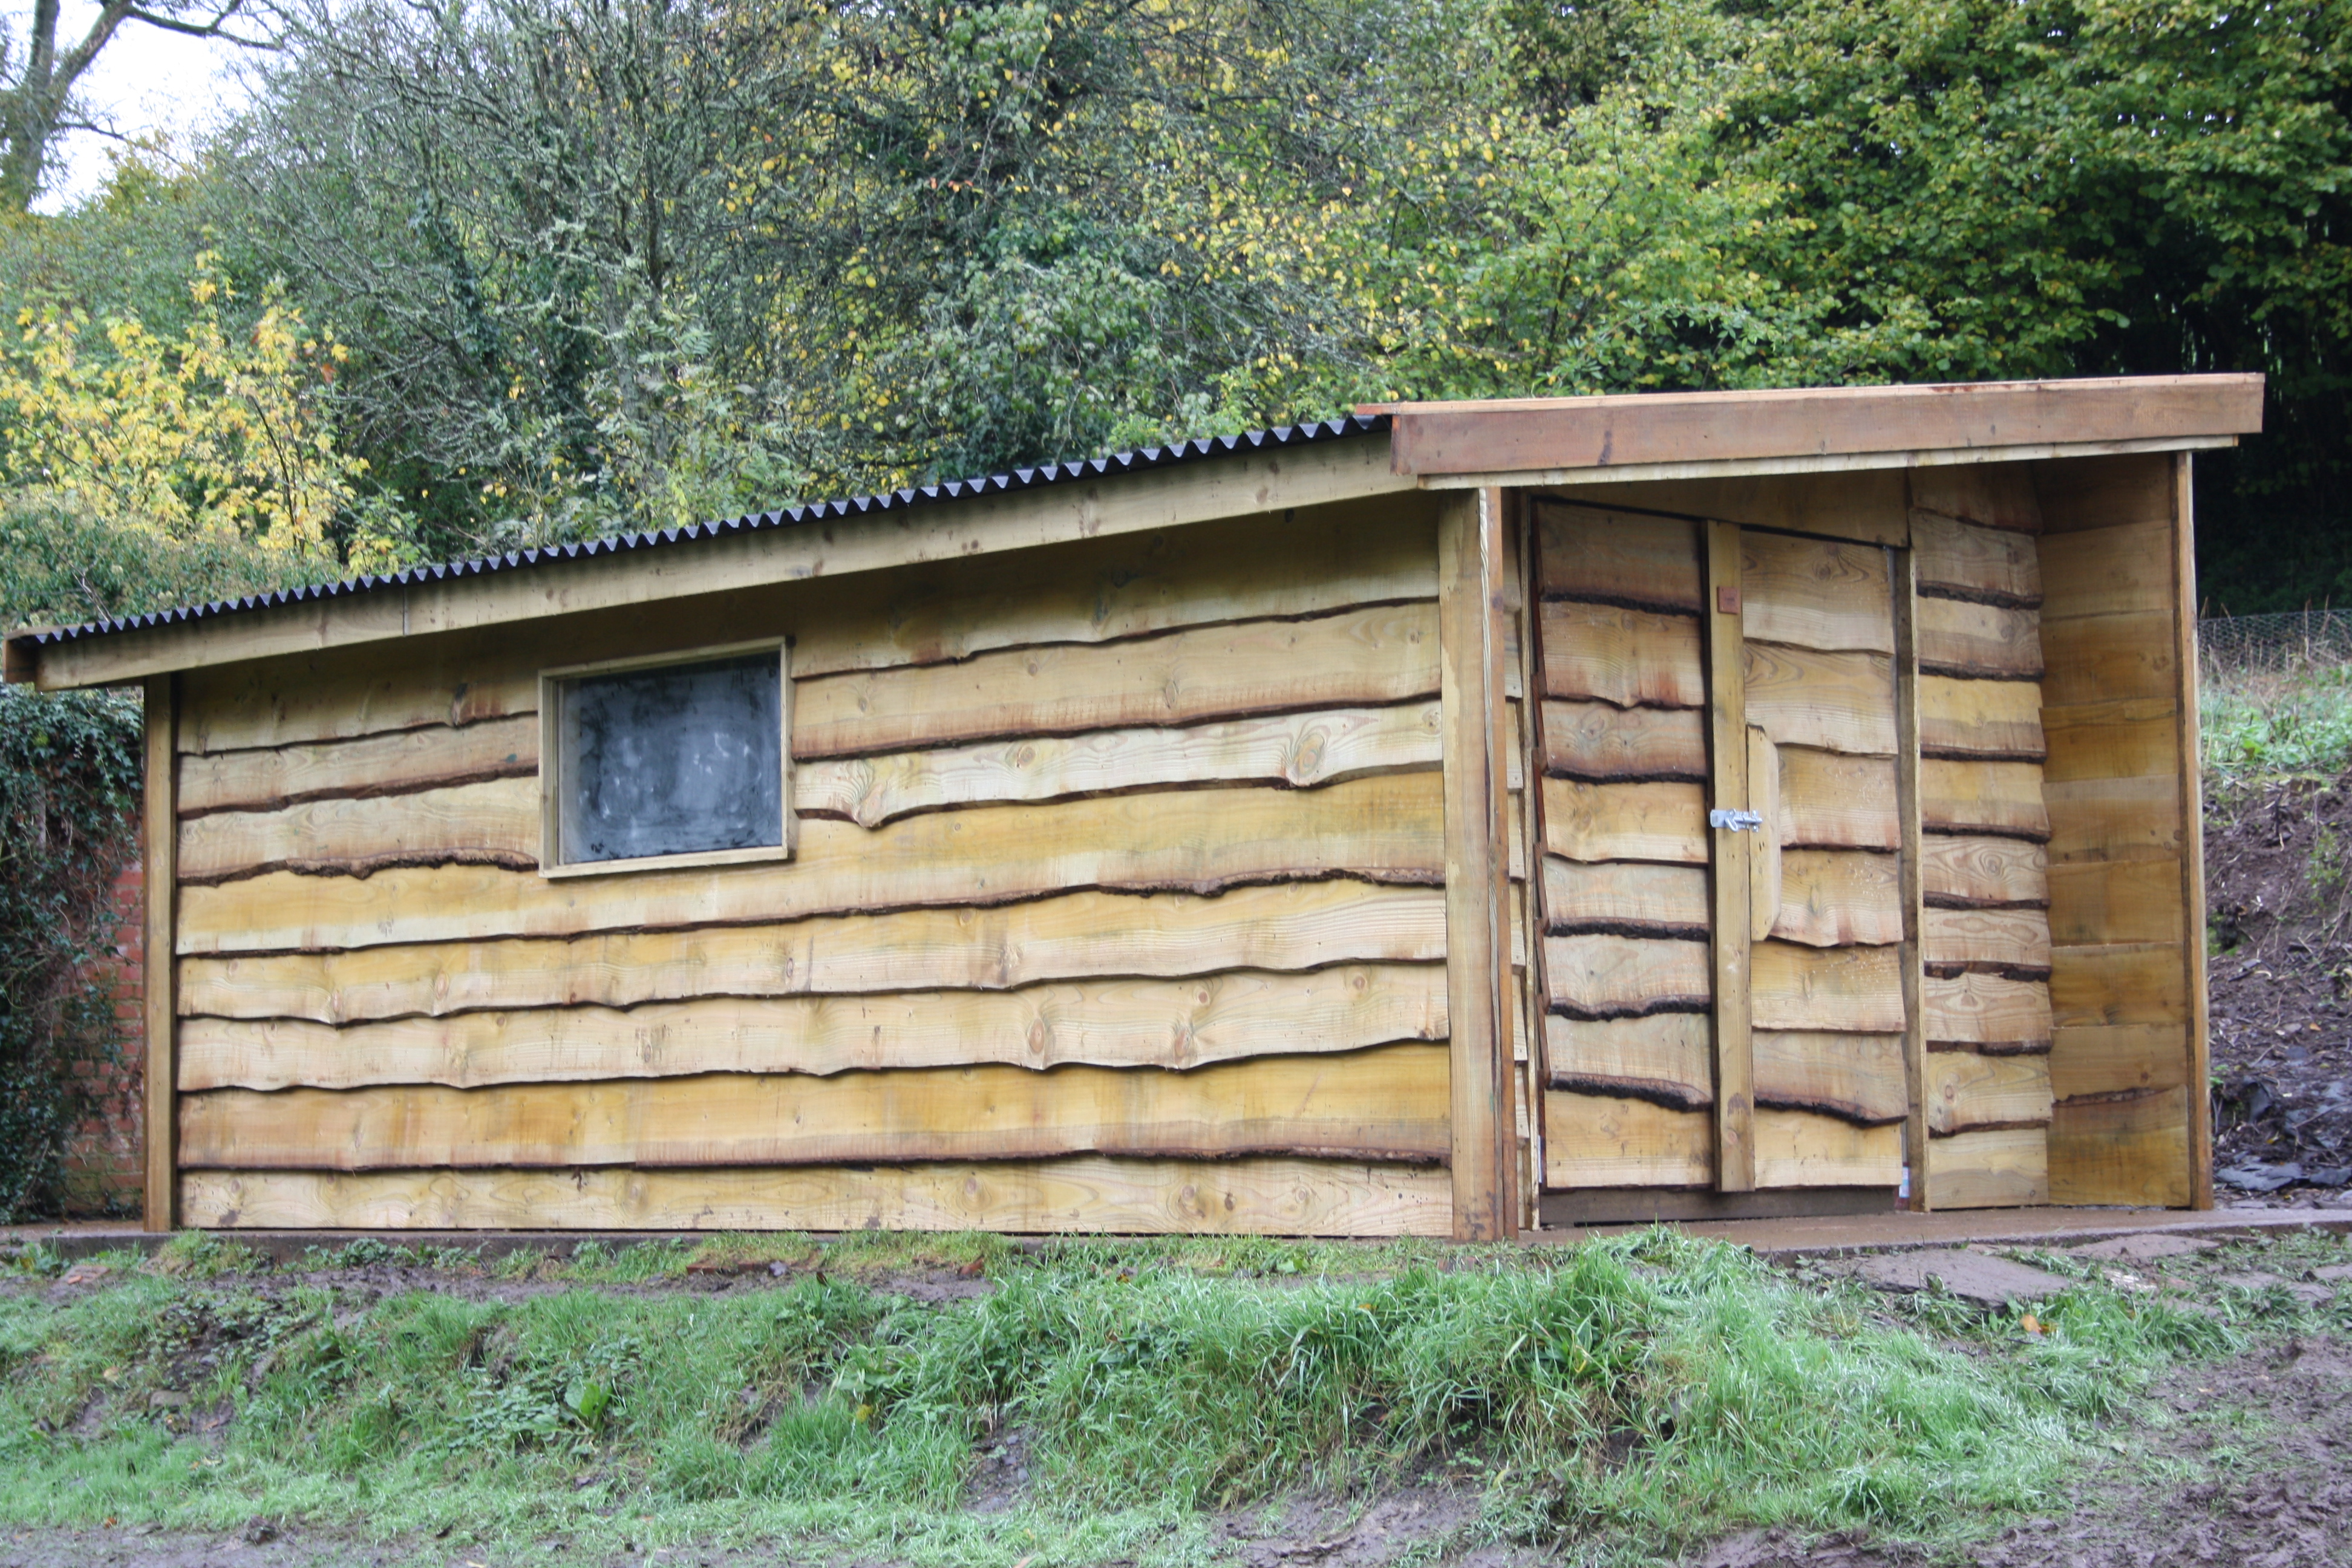  shed is a pretty and functional way of increasing work and storage